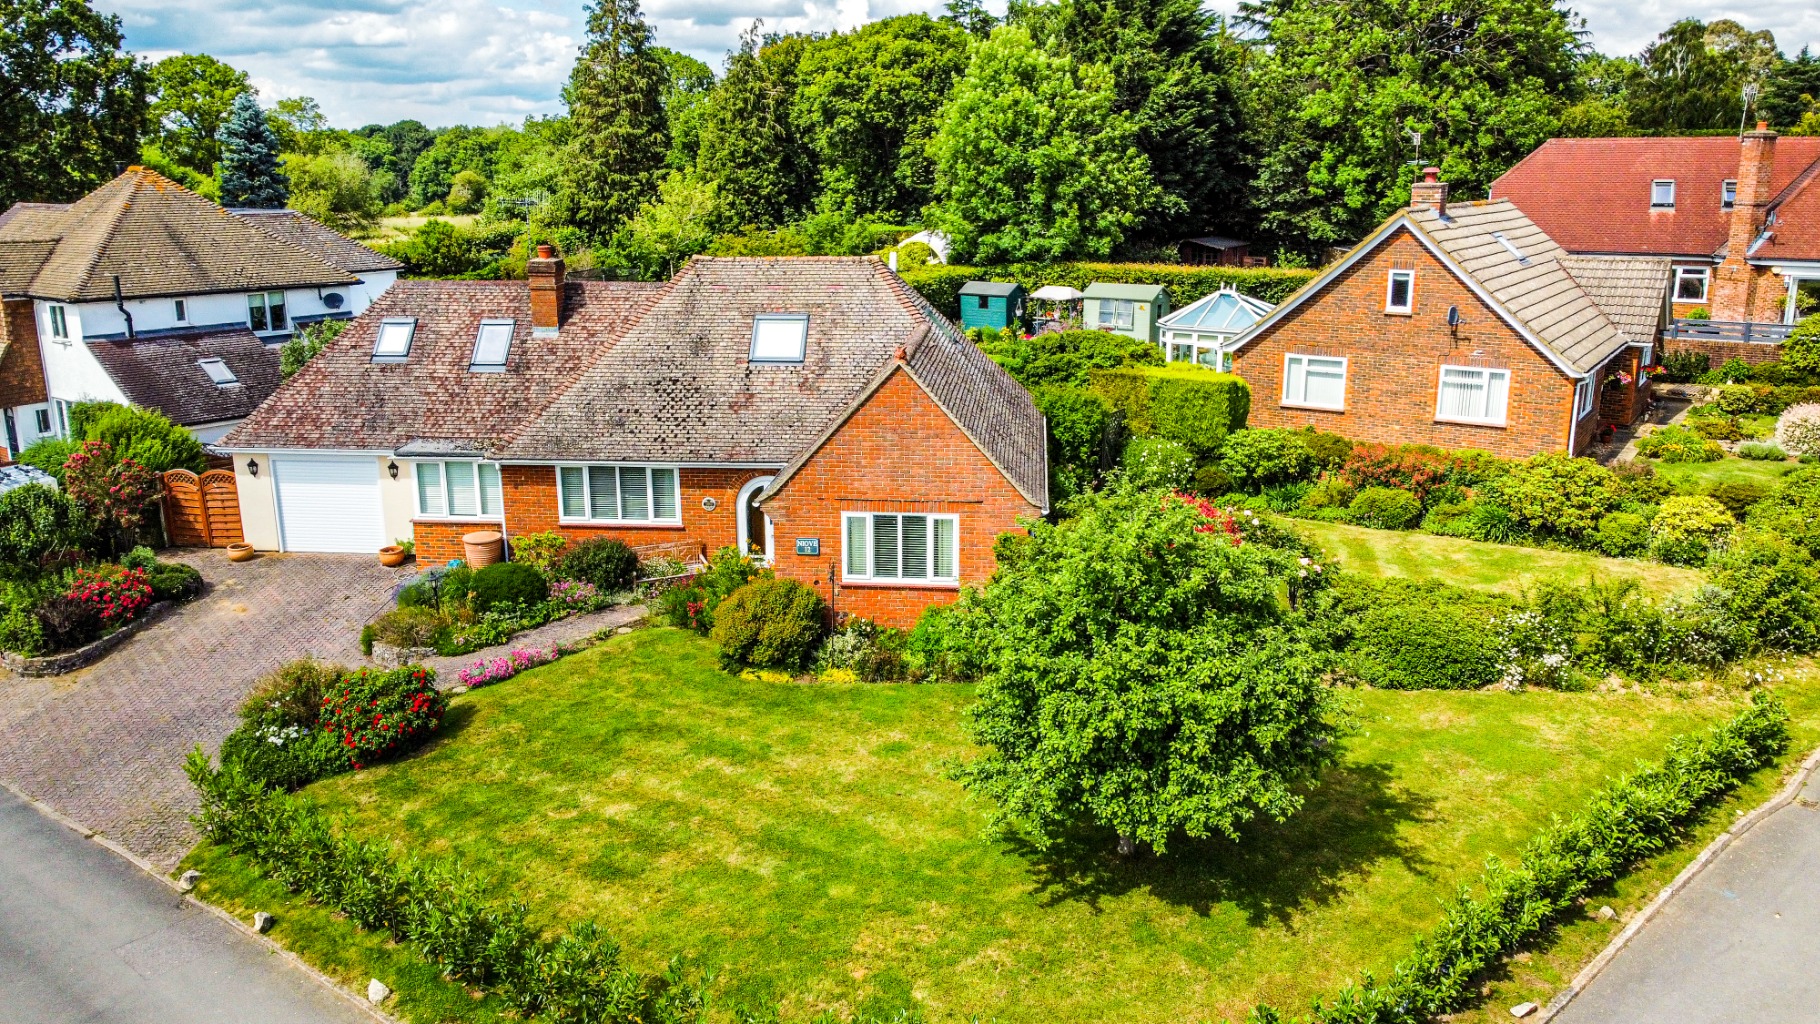 Avocado Surrey is delighted to present to the market, this beautifully presented four bedroom detached chalet Bungalow which is located in a quiet private cul-de-sac in the sought after village of Send. This property offers flexible and versatile accommodation across two floors, potential to re-desi